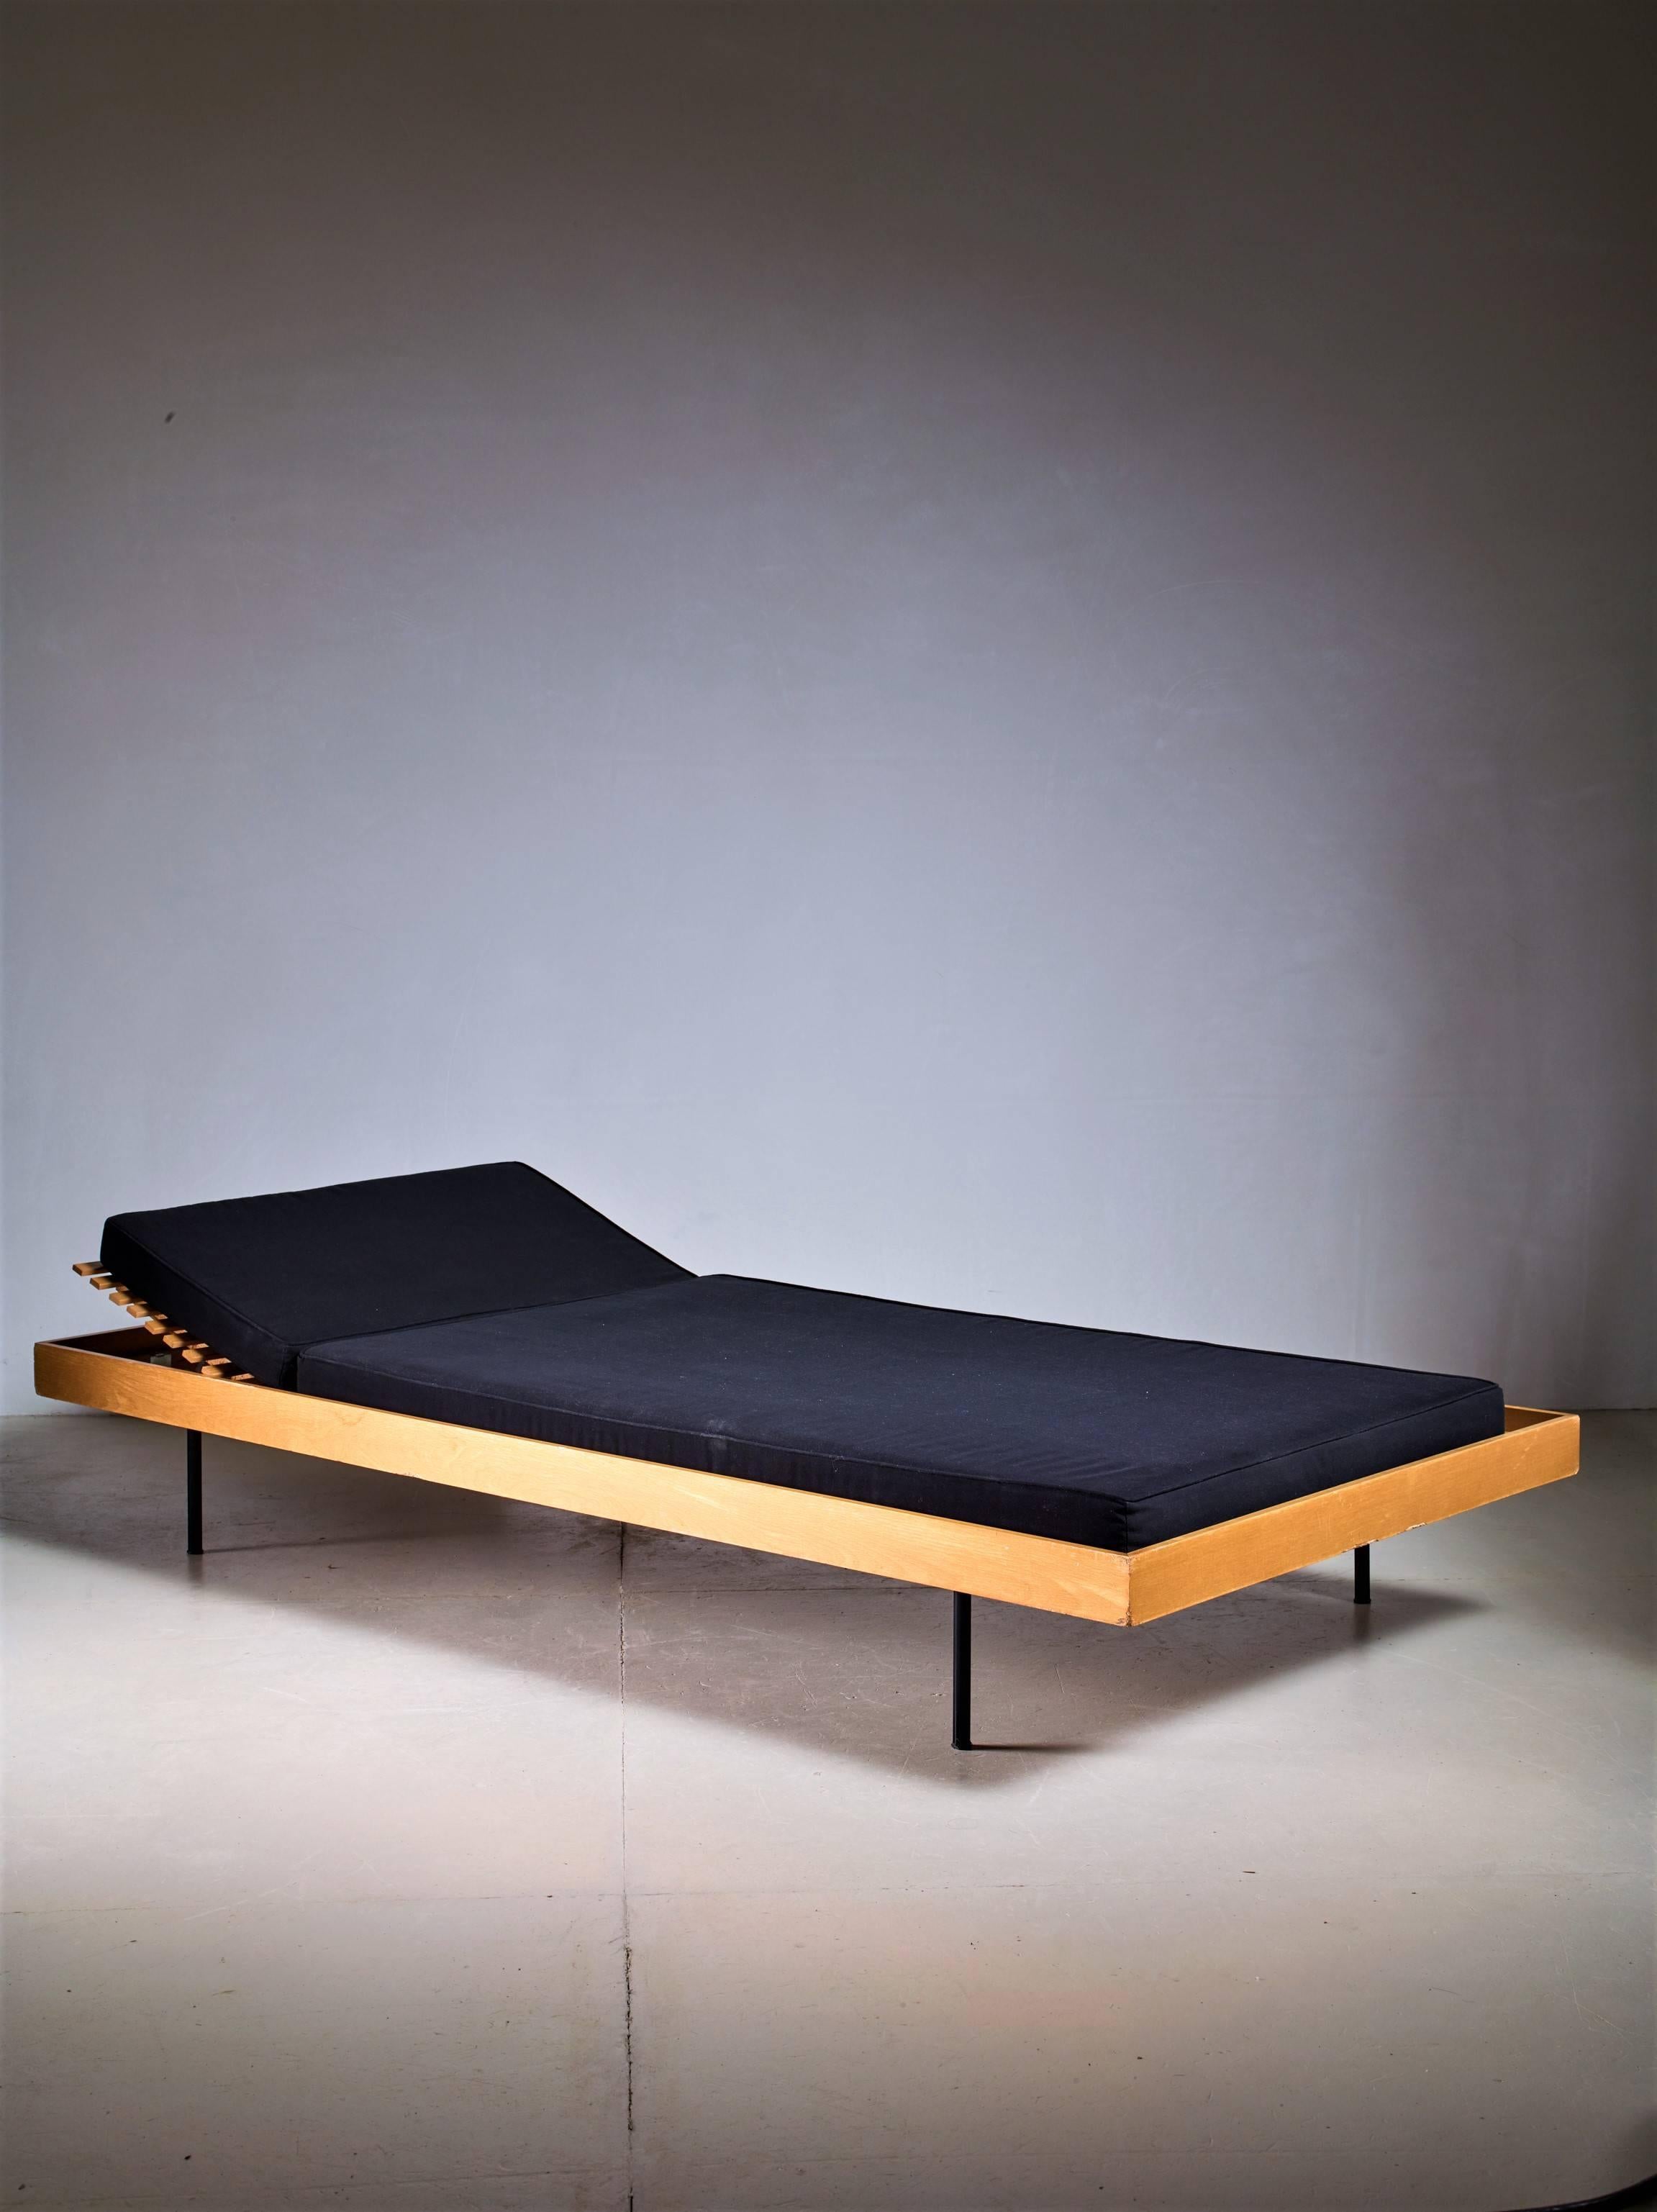 A wooden daybed with an adjustable headrest, for WK Möbel. The daybed is made of a wooden frame with wooden slats, standing on four thin black metal feet.

The mattress that is currently on the daybed is for image purposes only and not the correct